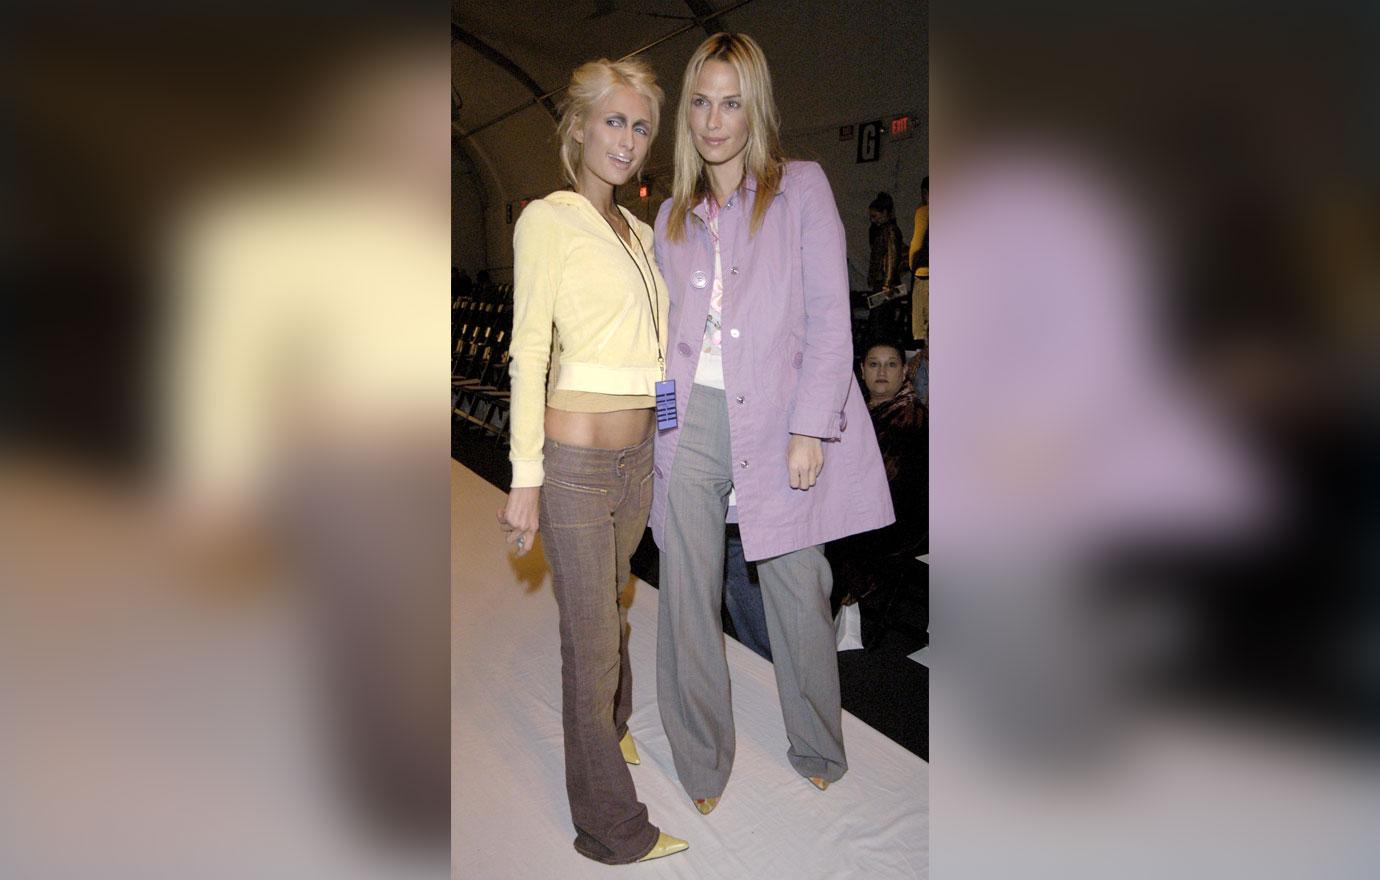 Paris Hilton says she owns 100 Juicy Couture tracksuits